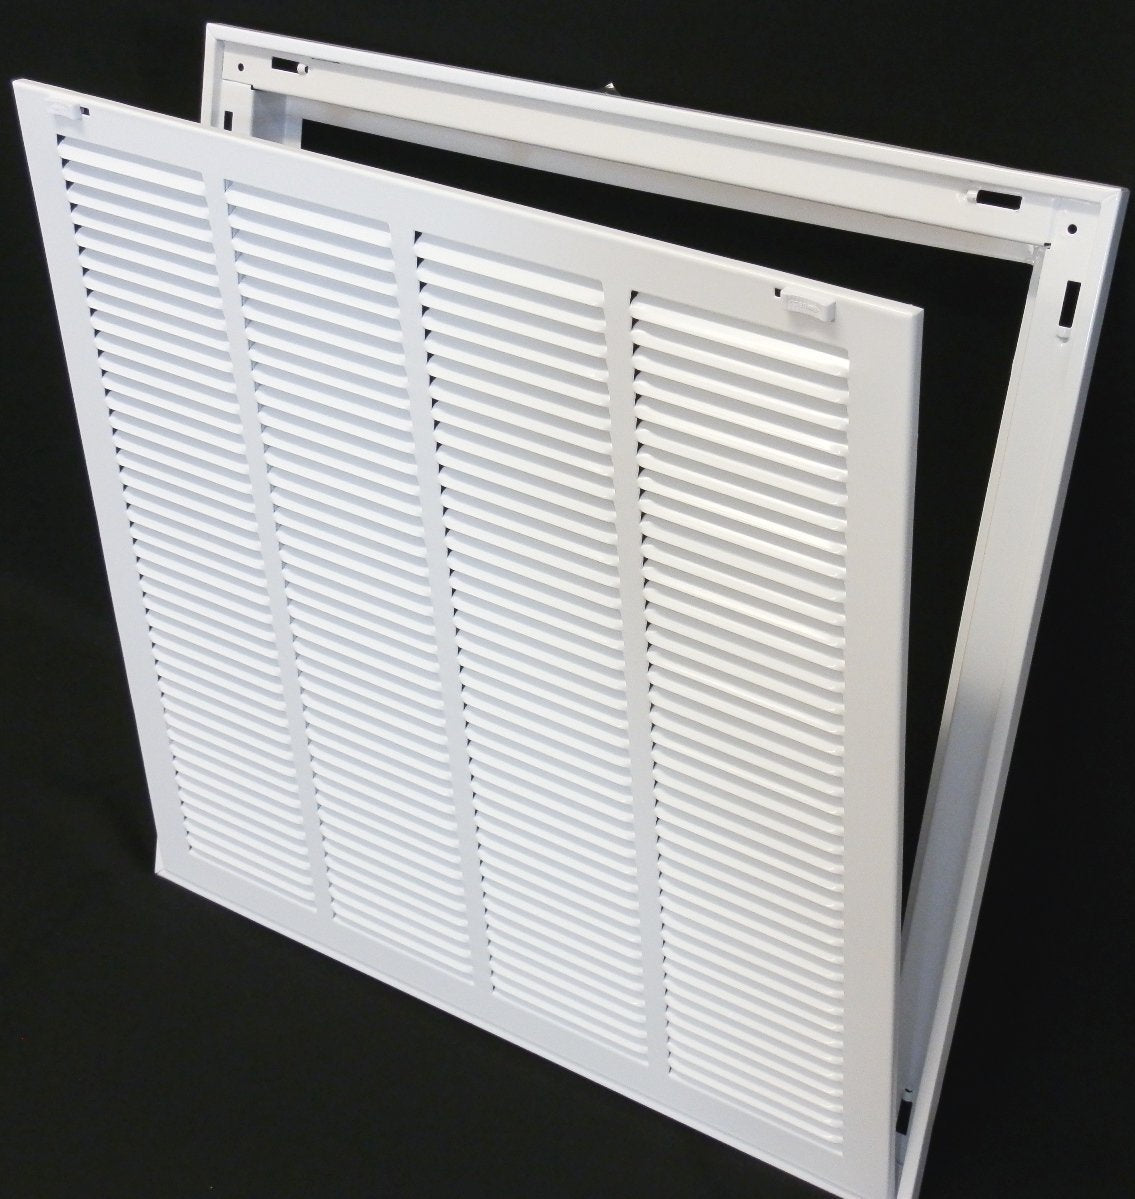 26&quot; X 36&quot; Steel Return Air Filter Grille for 1&quot; Filter - Removable Frame - [Outer Dimensions: 28 5/8&quot; X 38 5/8&quot;]